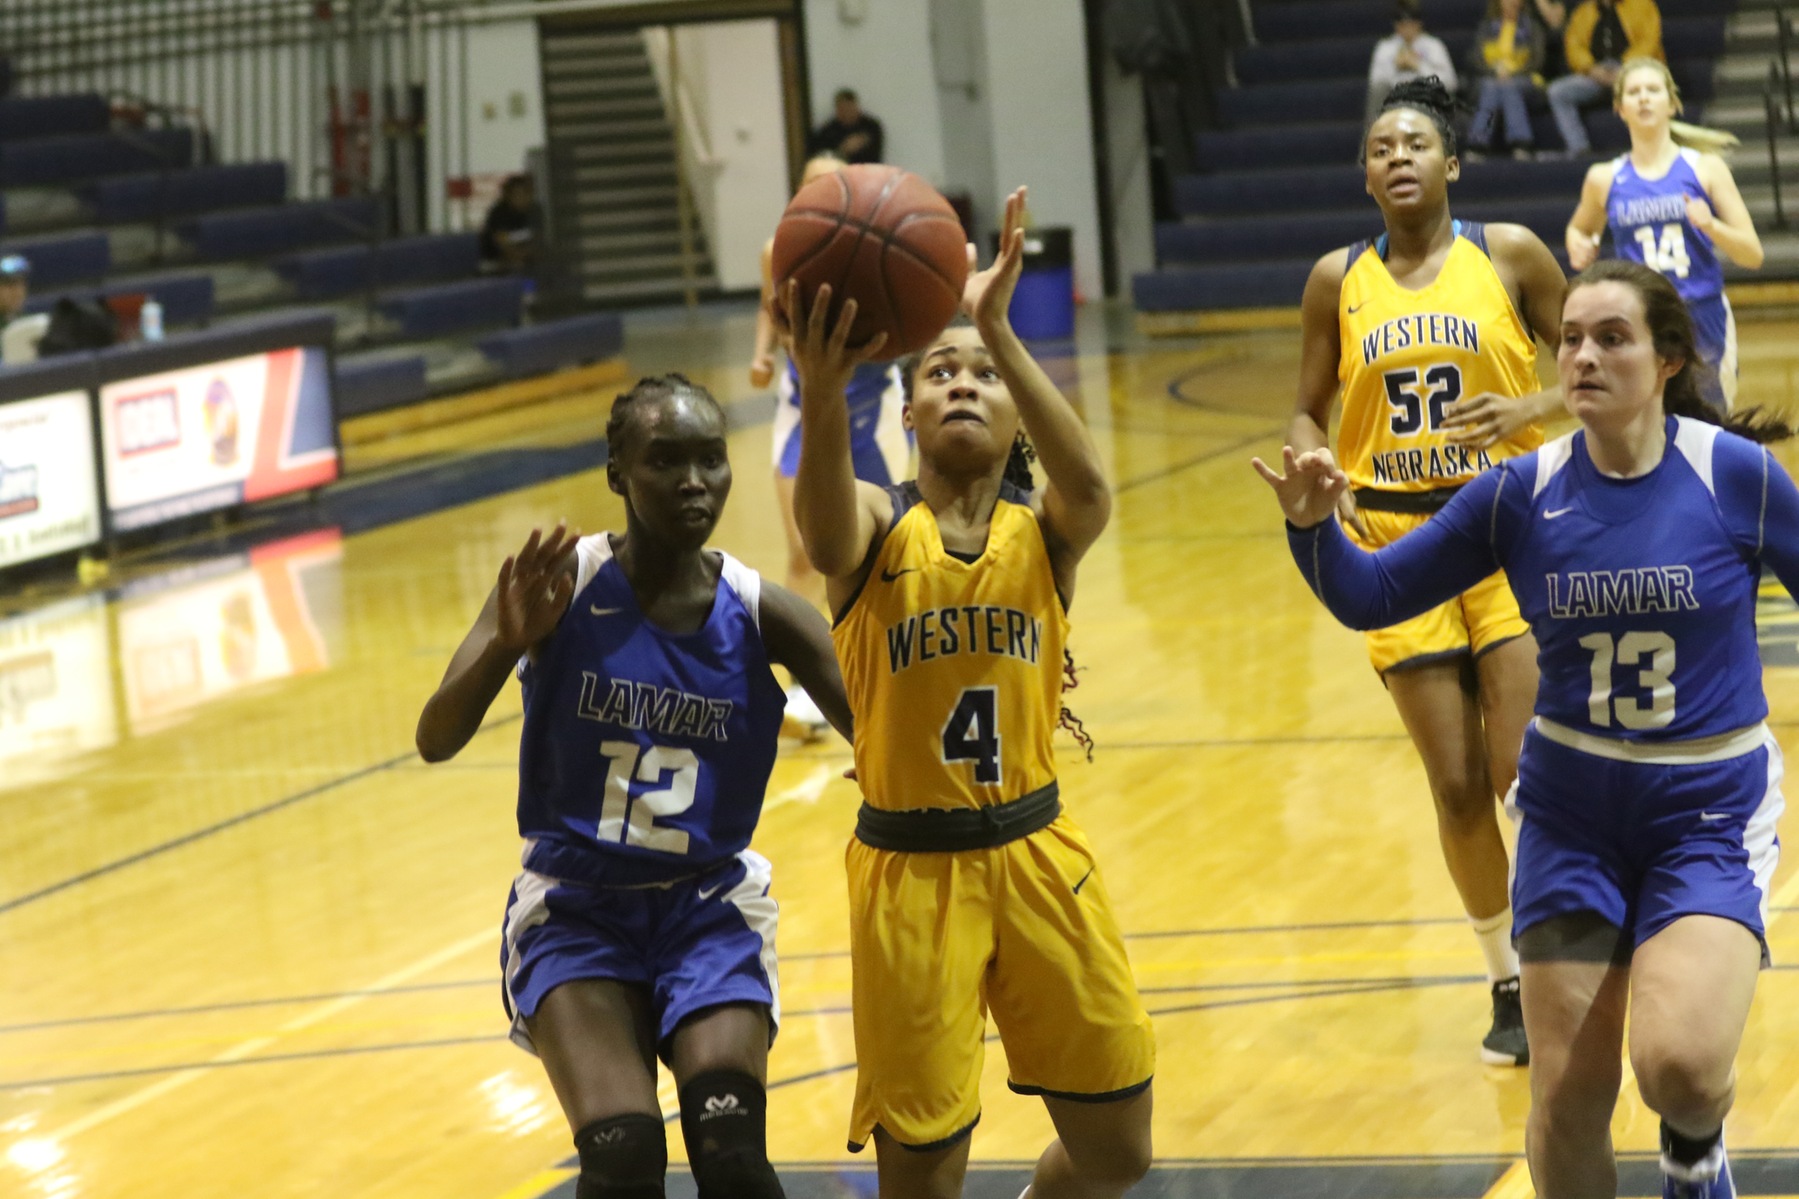 No. 2 WNCC women capture 25th win; Cougar coach Gibney wins his 100th career game